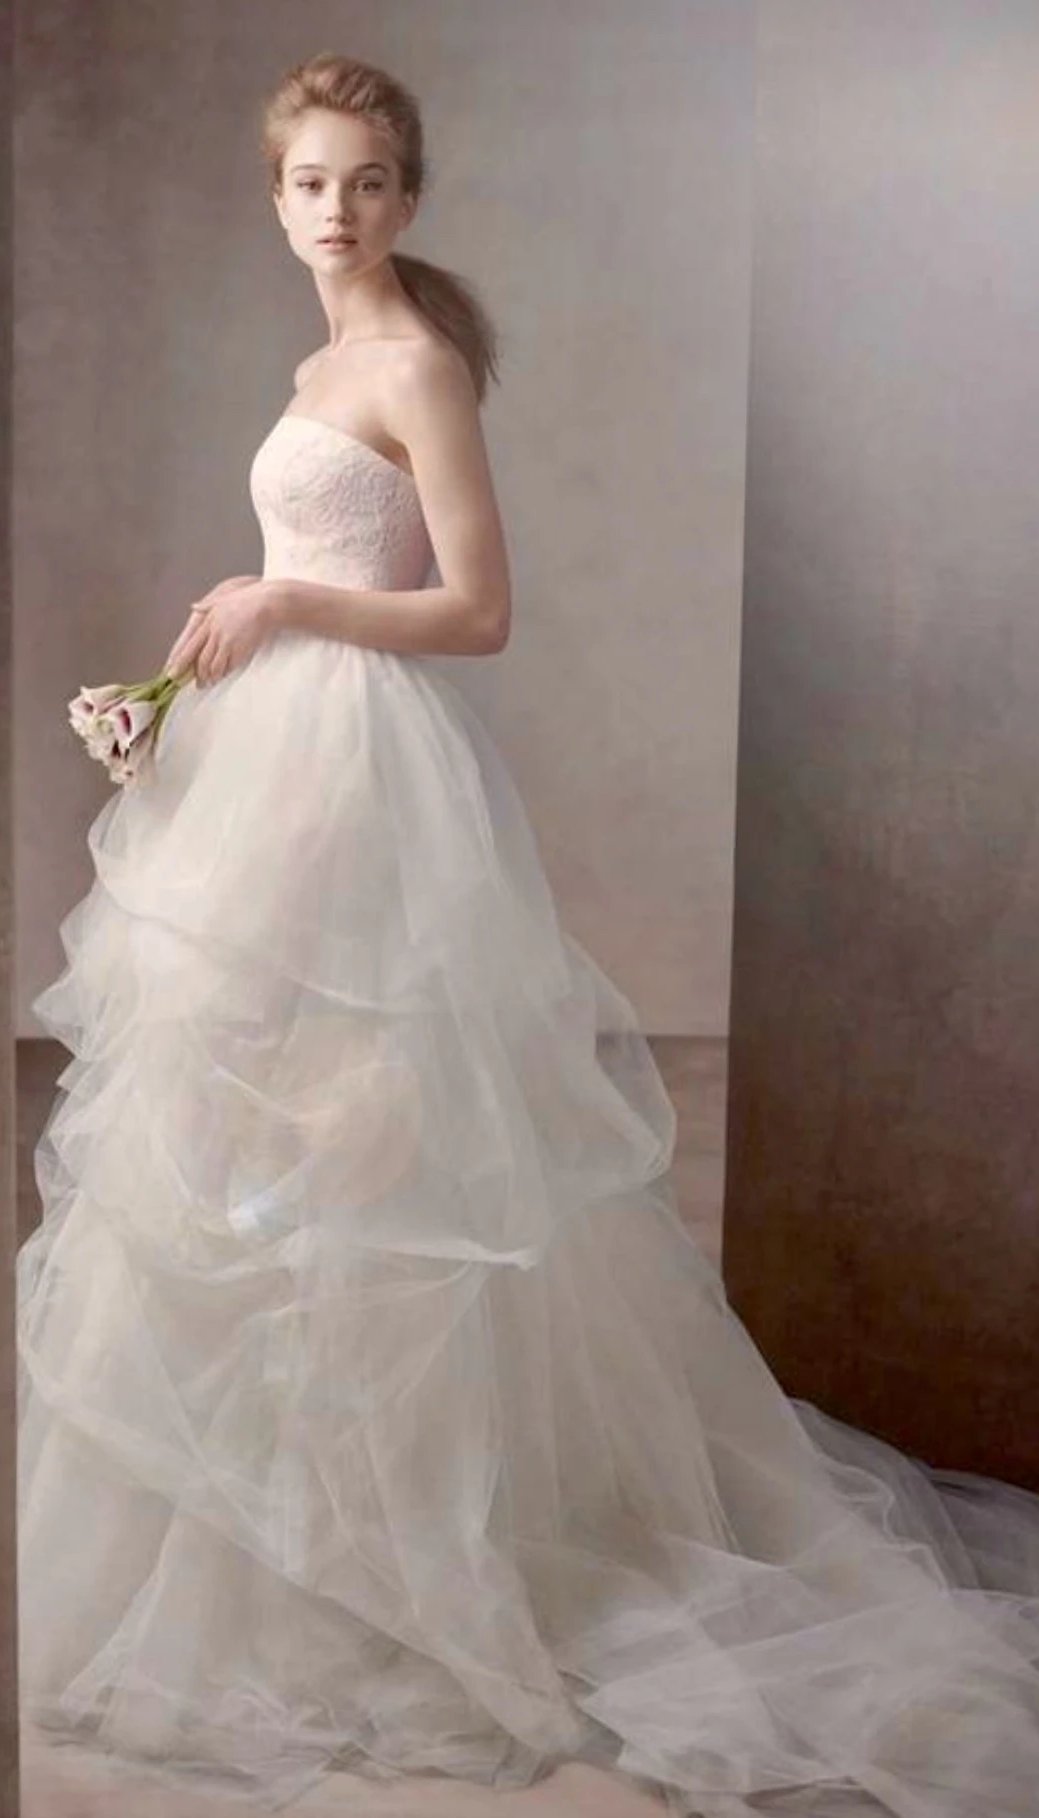 Vera Wang White 'Ball Gown 351065' size 8 used wedding dress side view on model